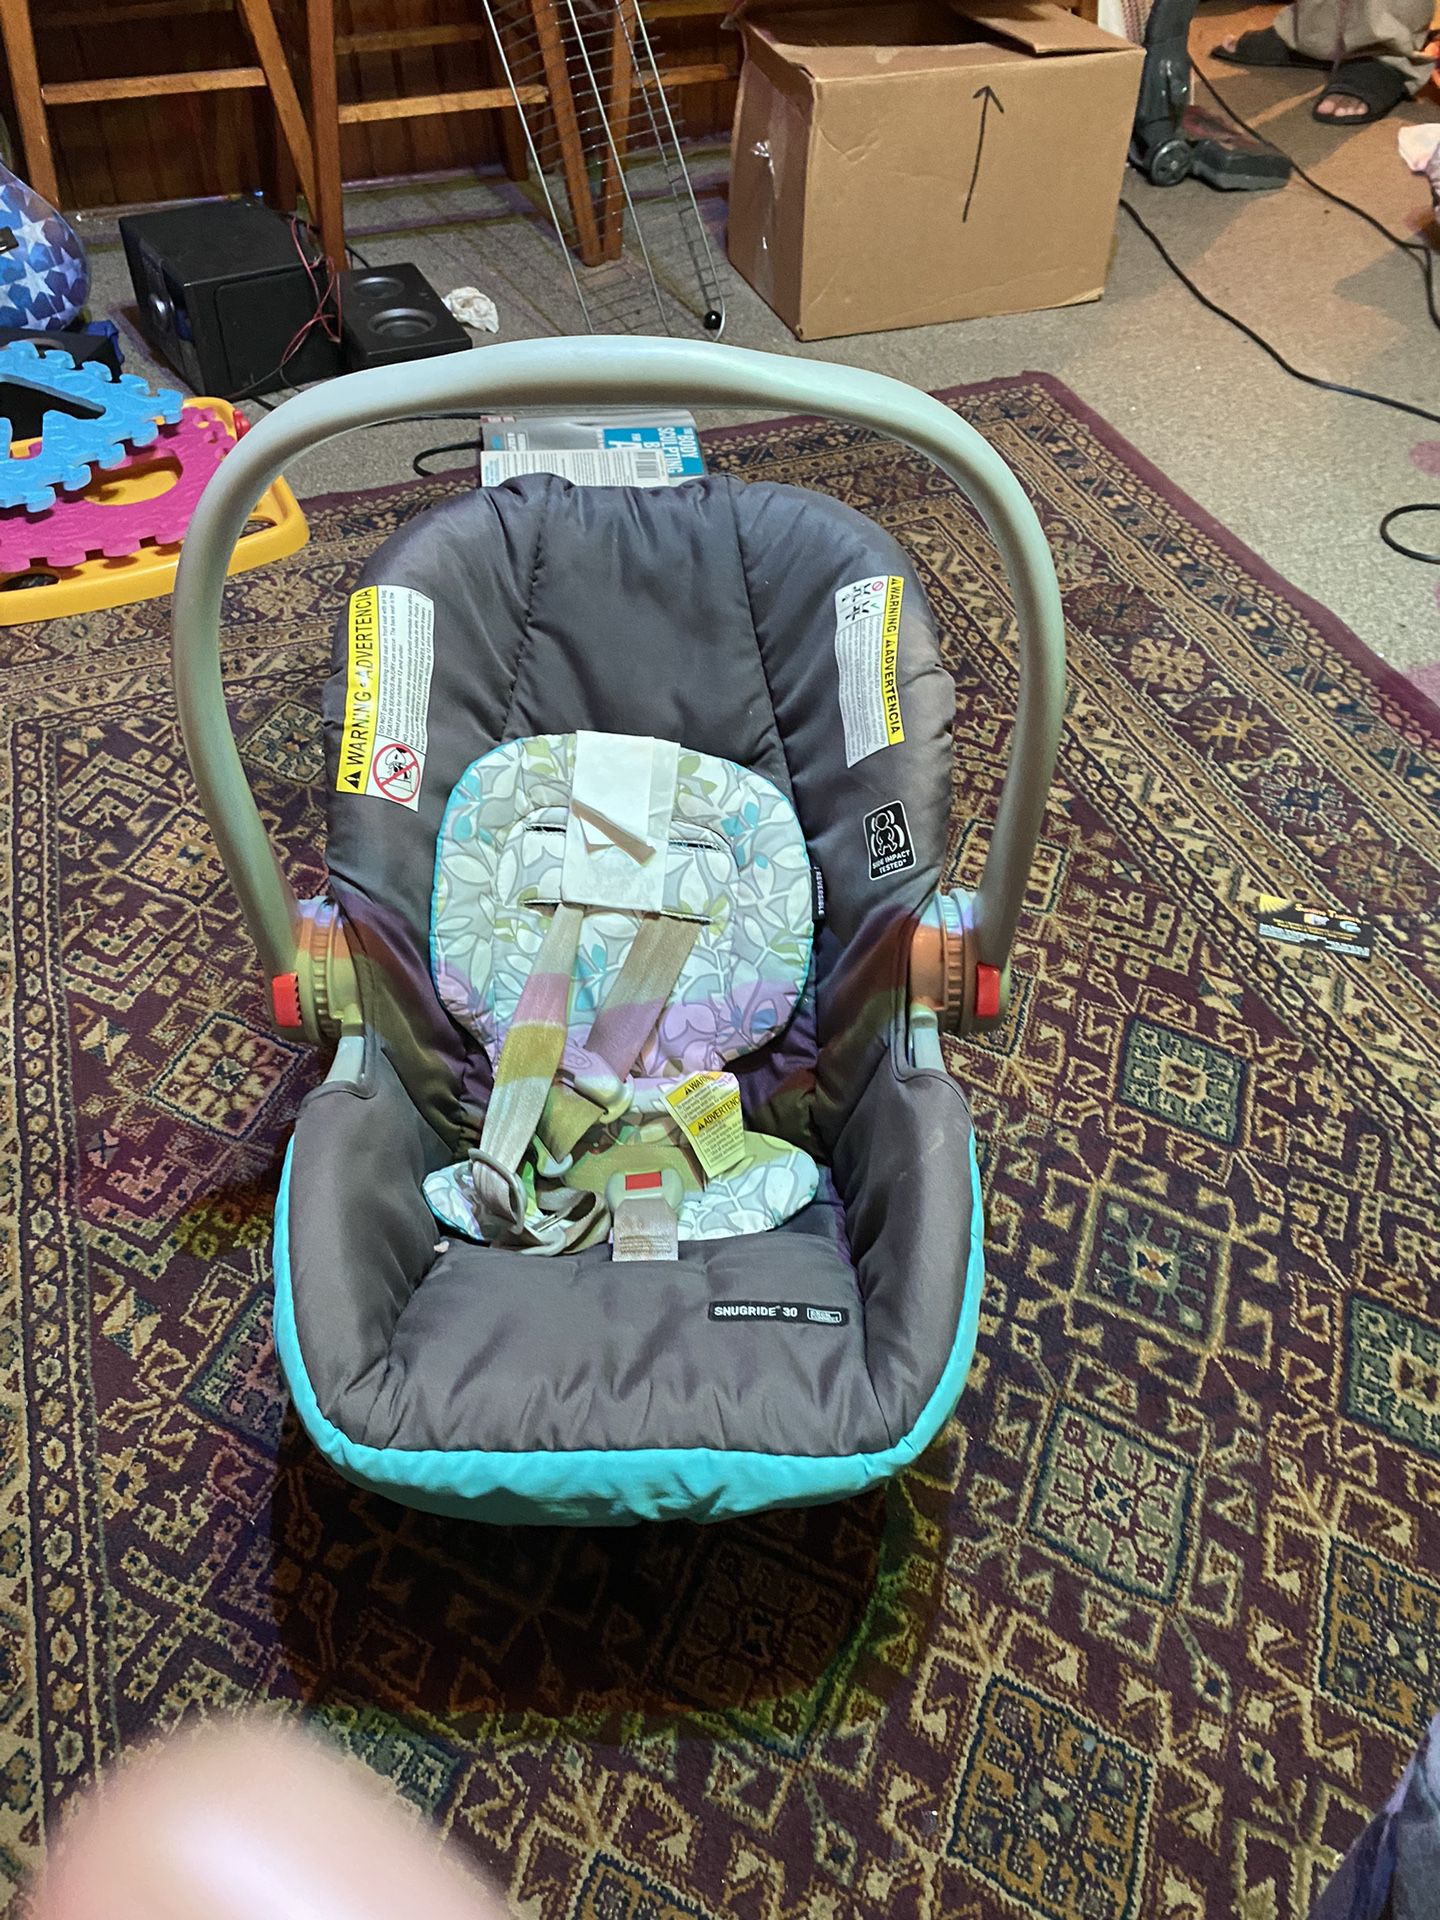 $50 Bundle Baby Carseat With Vibrating And Singing Baby Chair